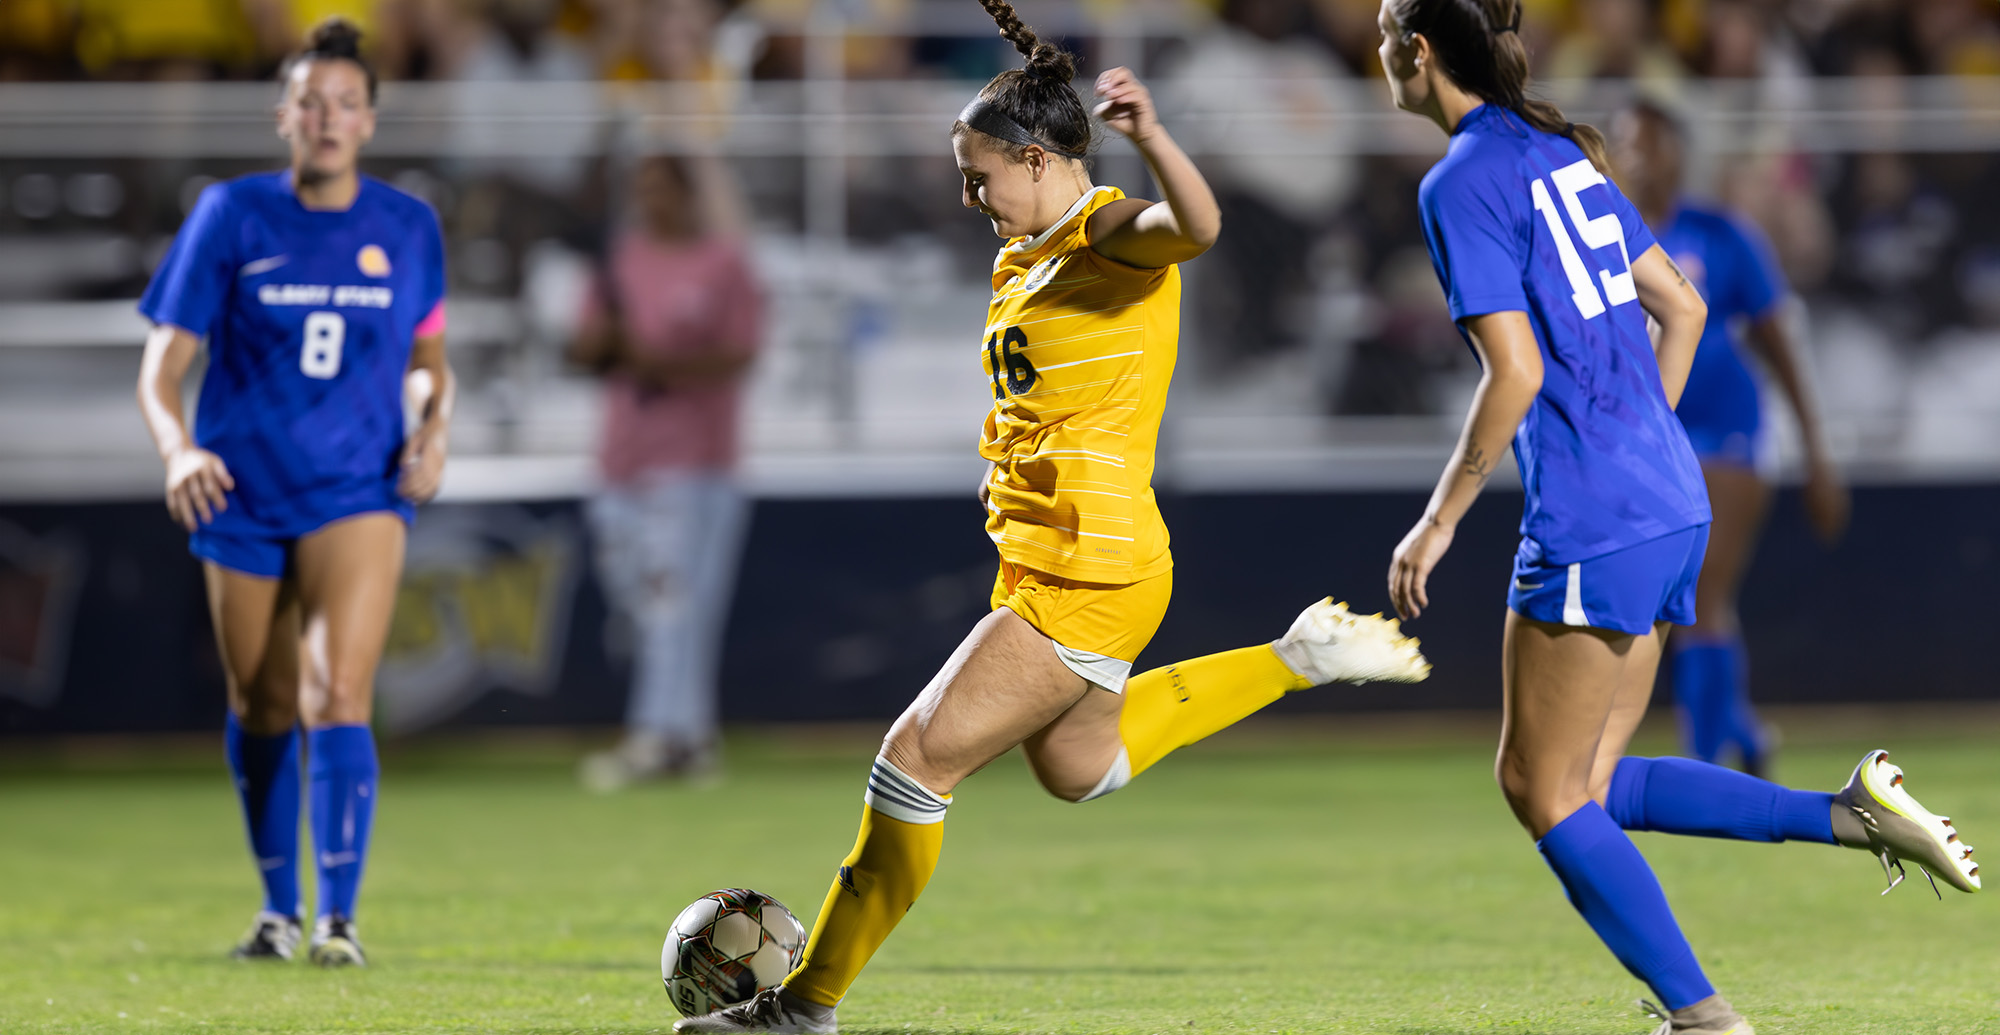 The Golden Ticket; Hurricanes Sweep Albany State 4-0